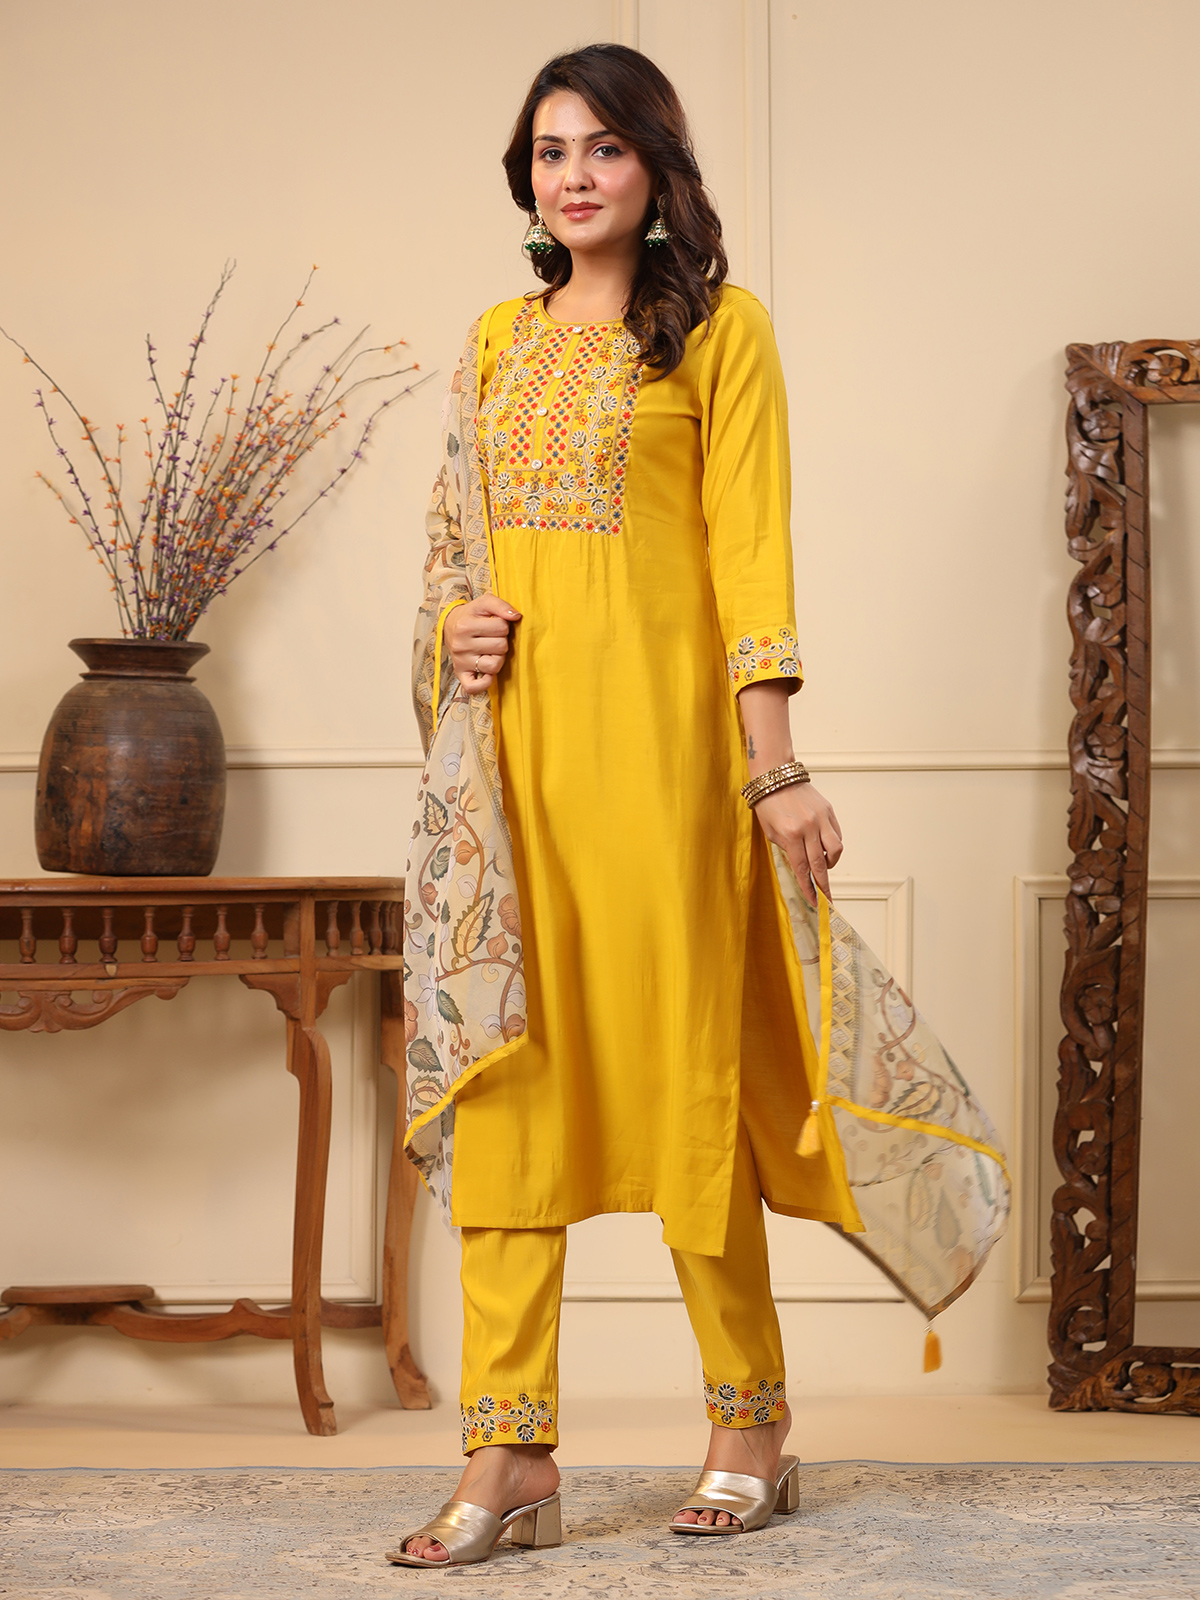 Shop Mustard yellow and white moroccan scalloped kurta | The Secret Label |  Kurti designs party wear, Ethnic outfits, Clothes for women